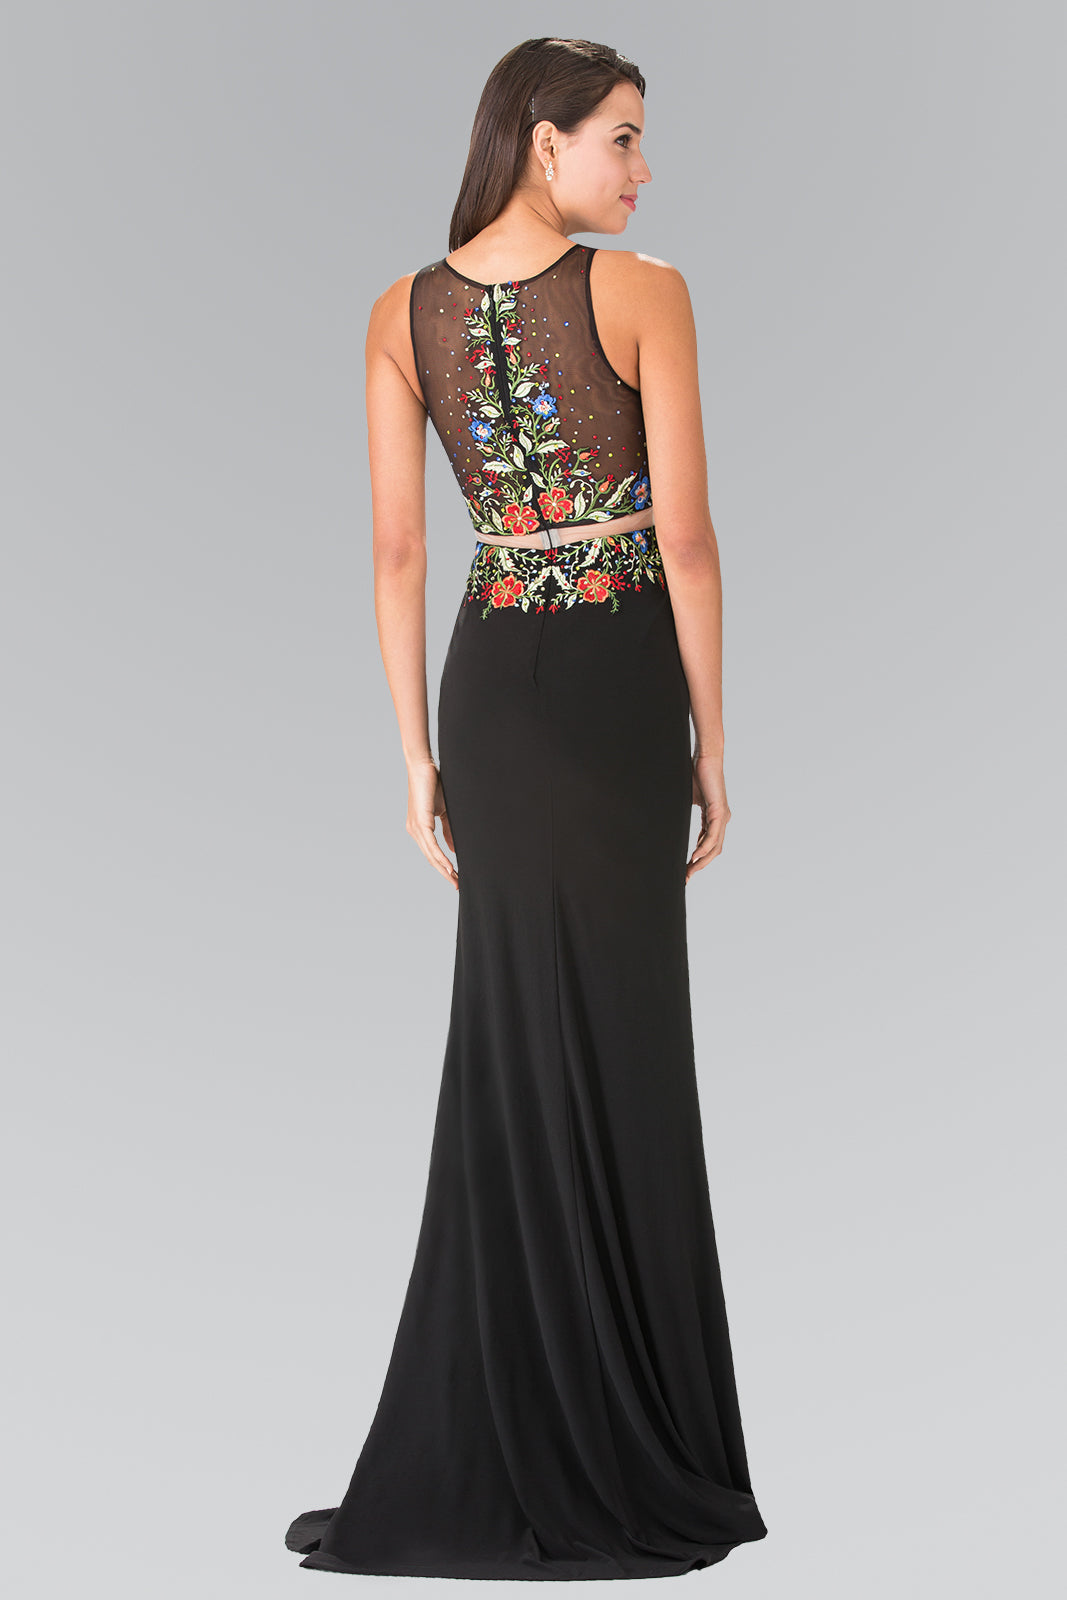 Mock Two-Piece Jersey Long Dress with Floral Embroidery Details GLGL2241 Elsy Style PROM